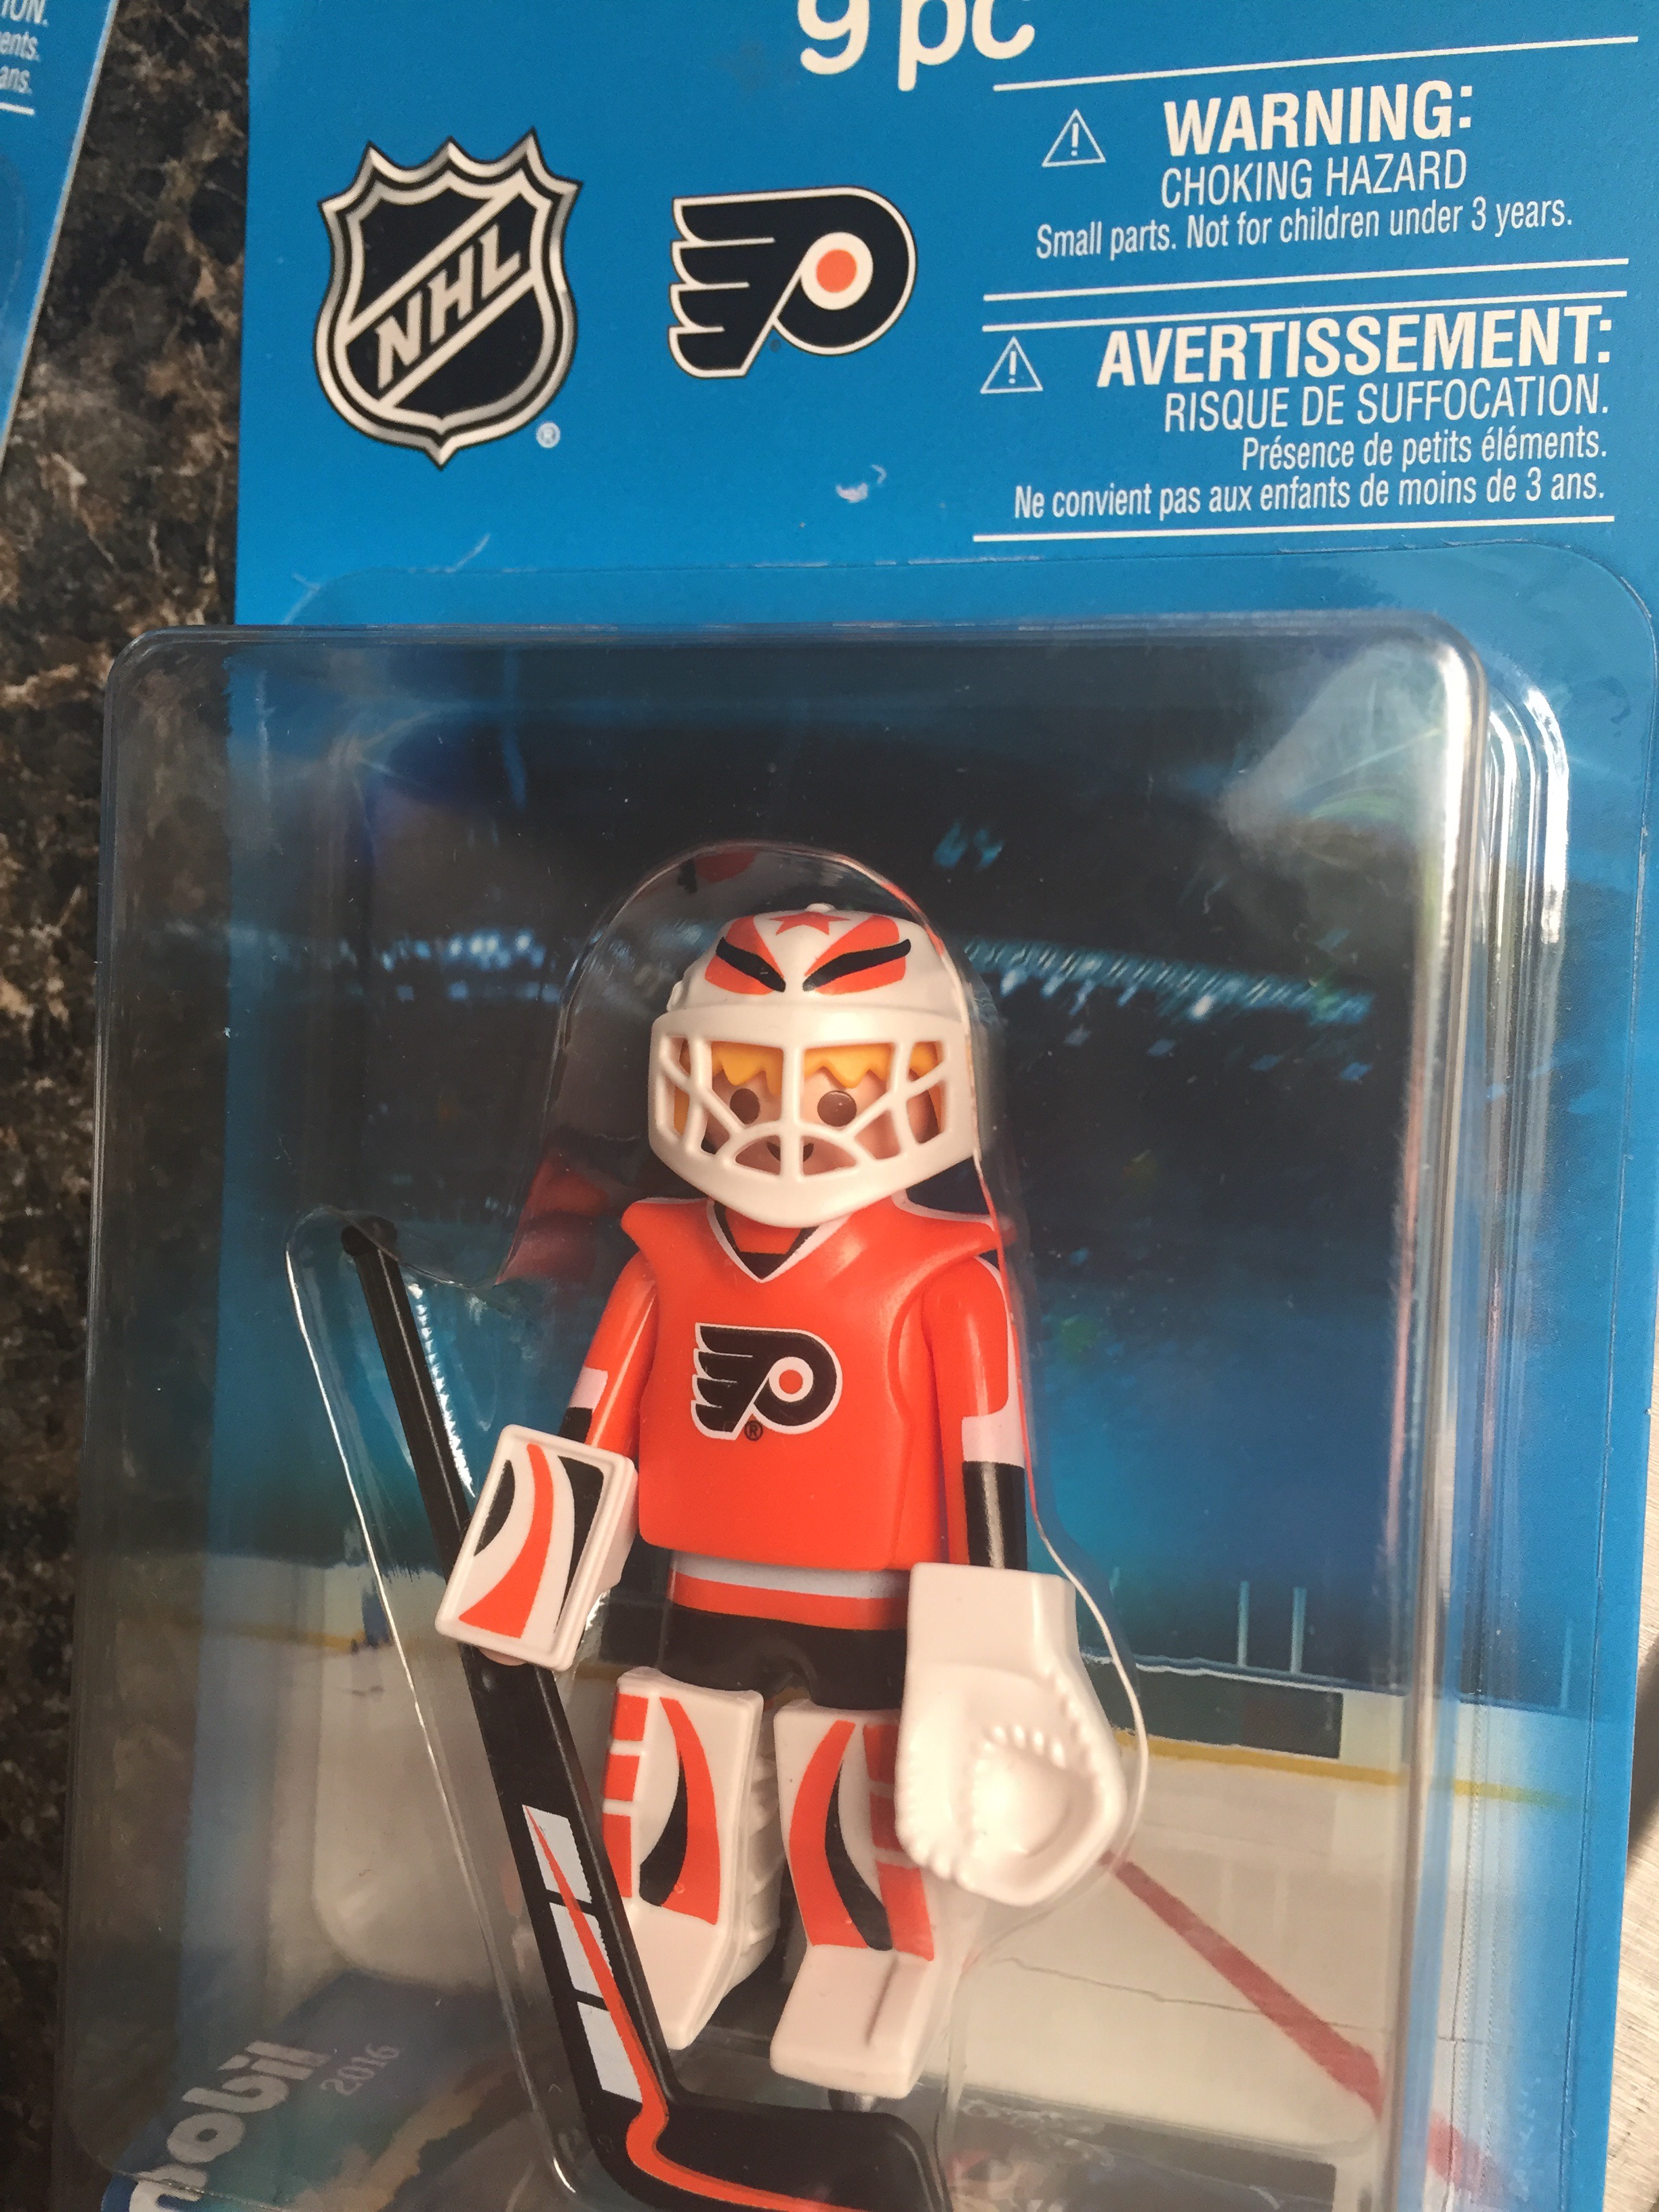 PLAYMOBIL has some pretty awesome Flyers & NHL figurines available